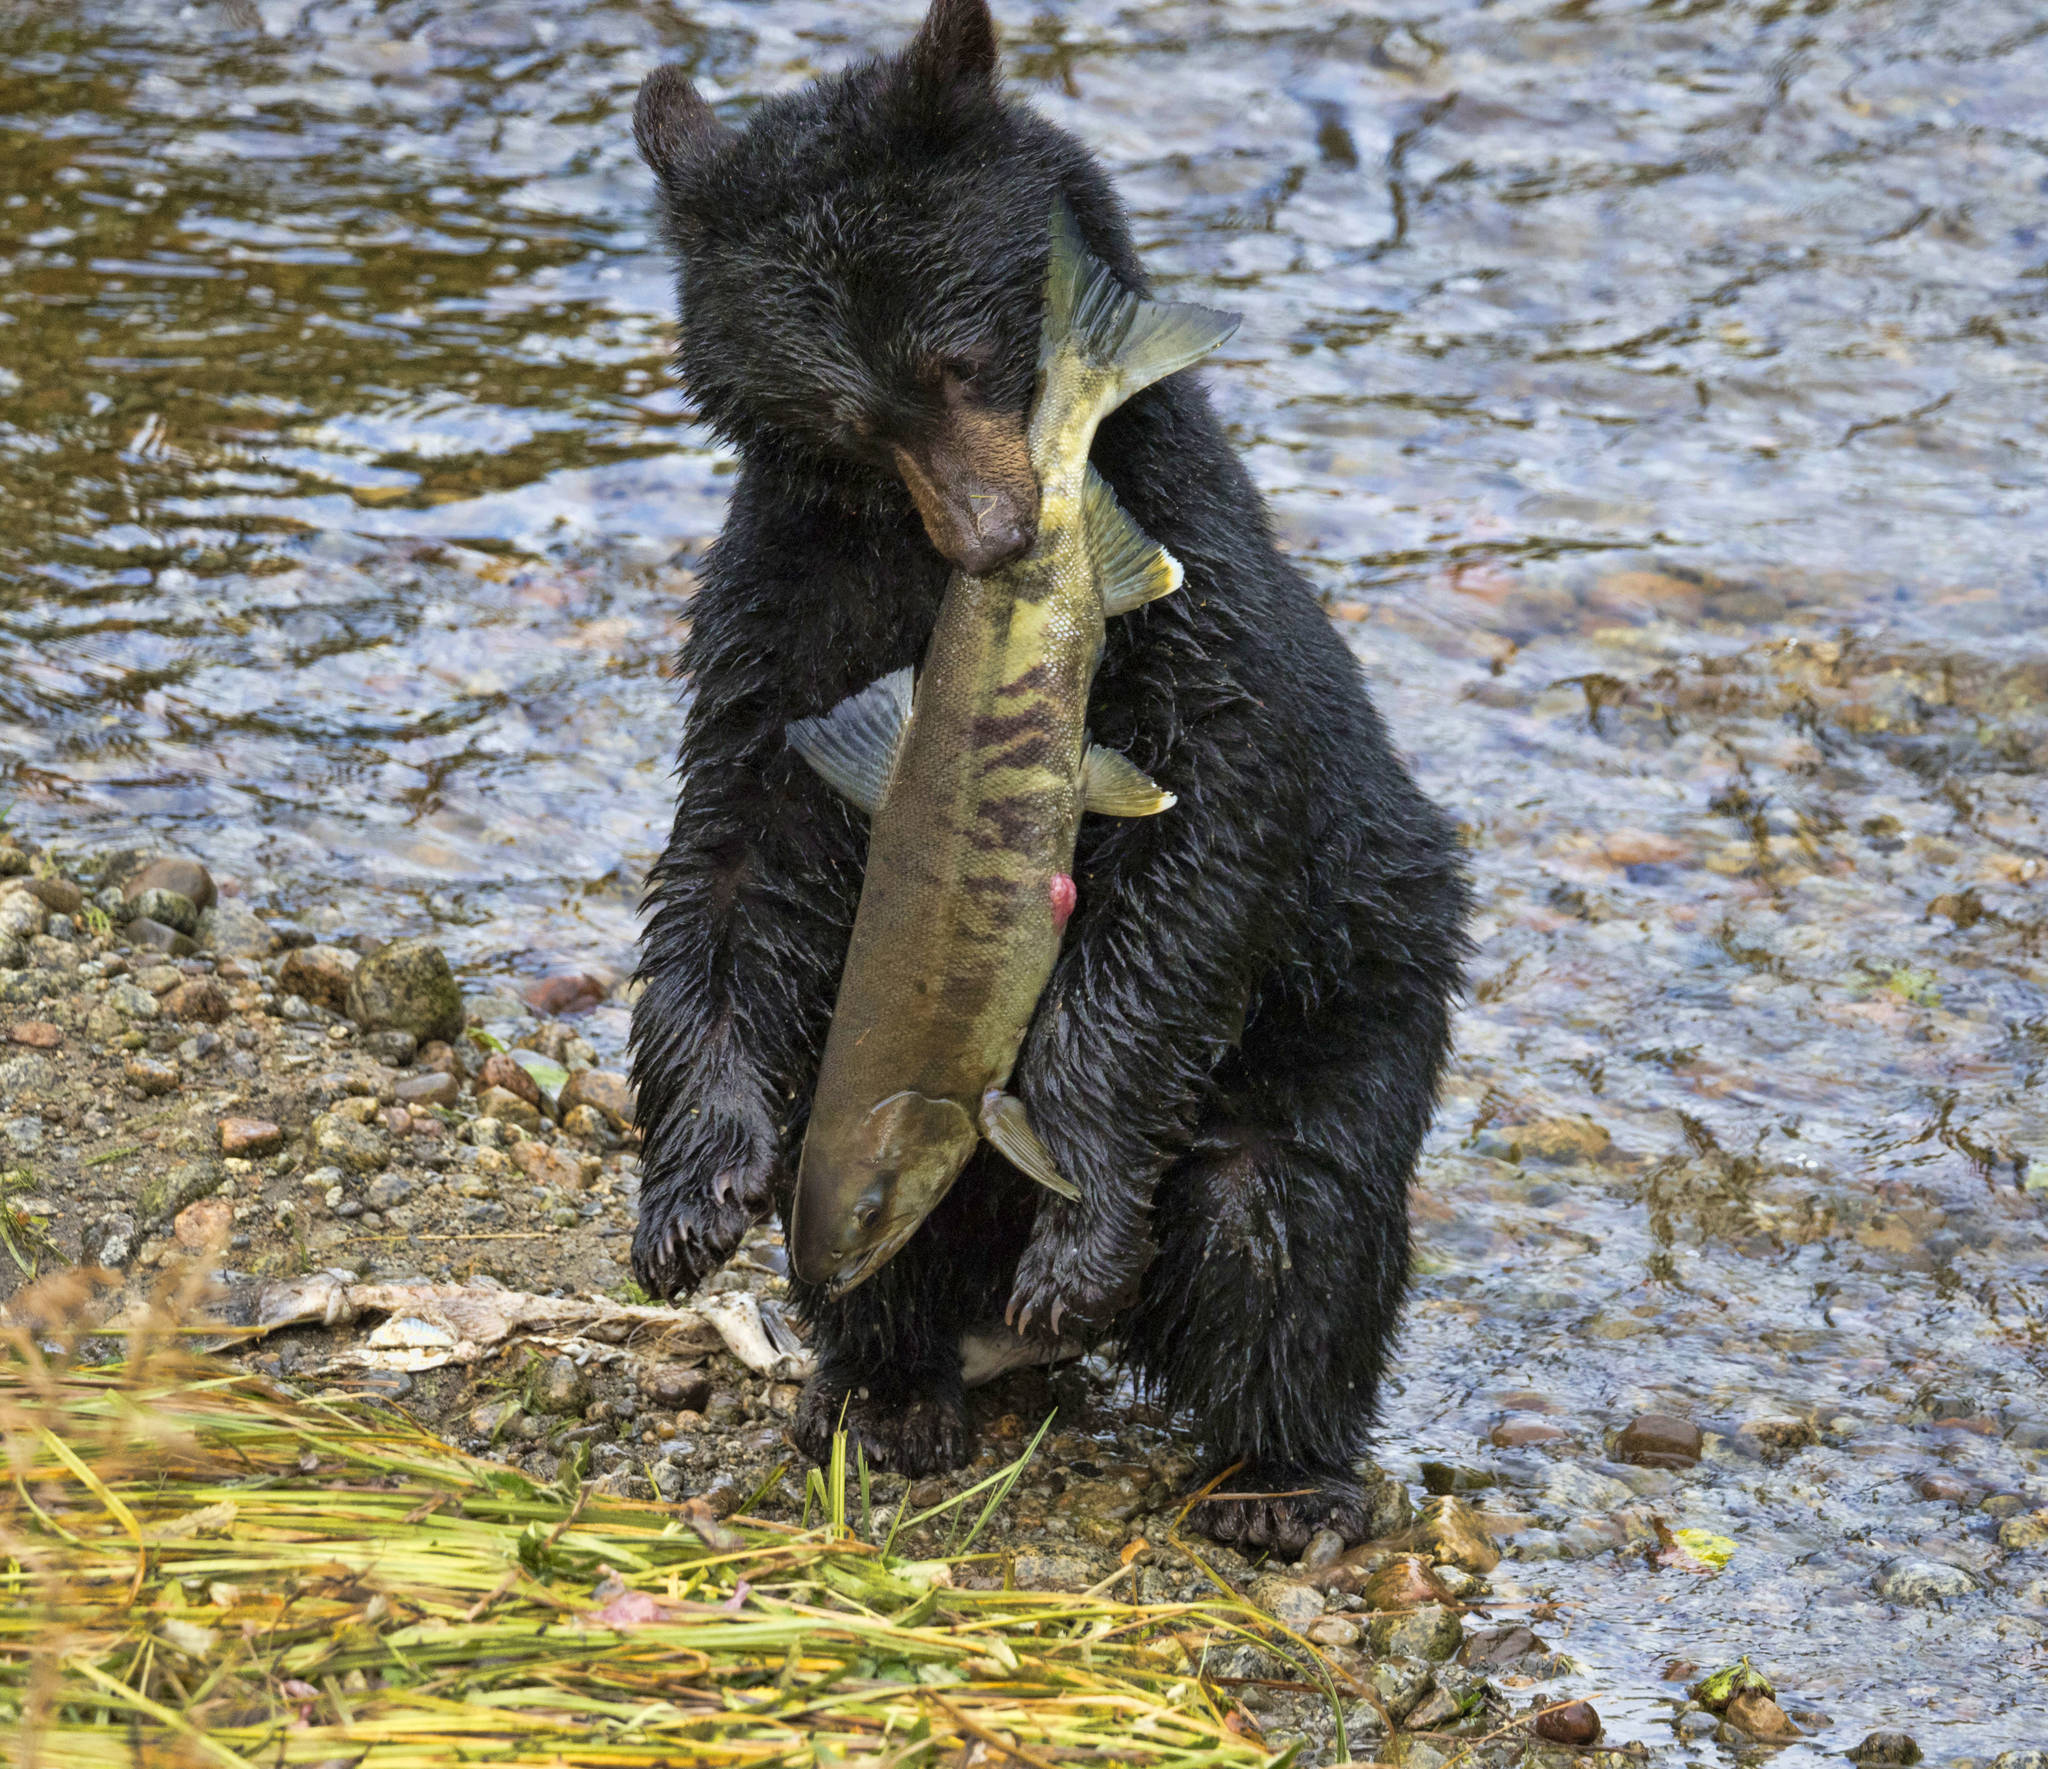 A yearling cub with a dog salmon. (Janice Gorle)